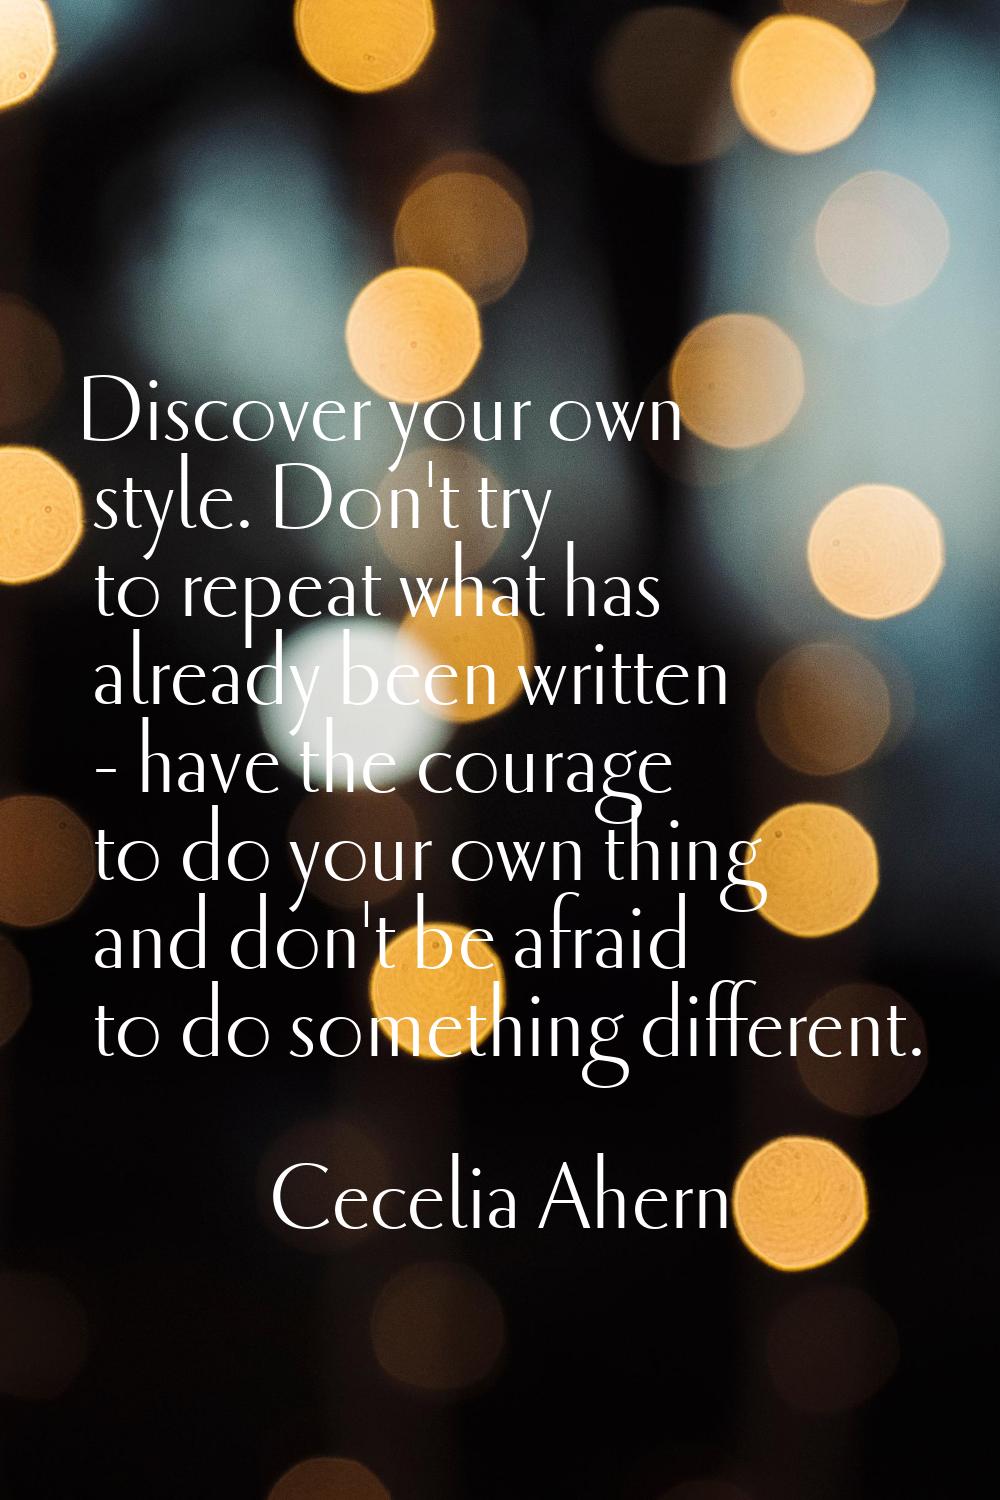 Discover your own style. Don't try to repeat what has already been written - have the courage to do